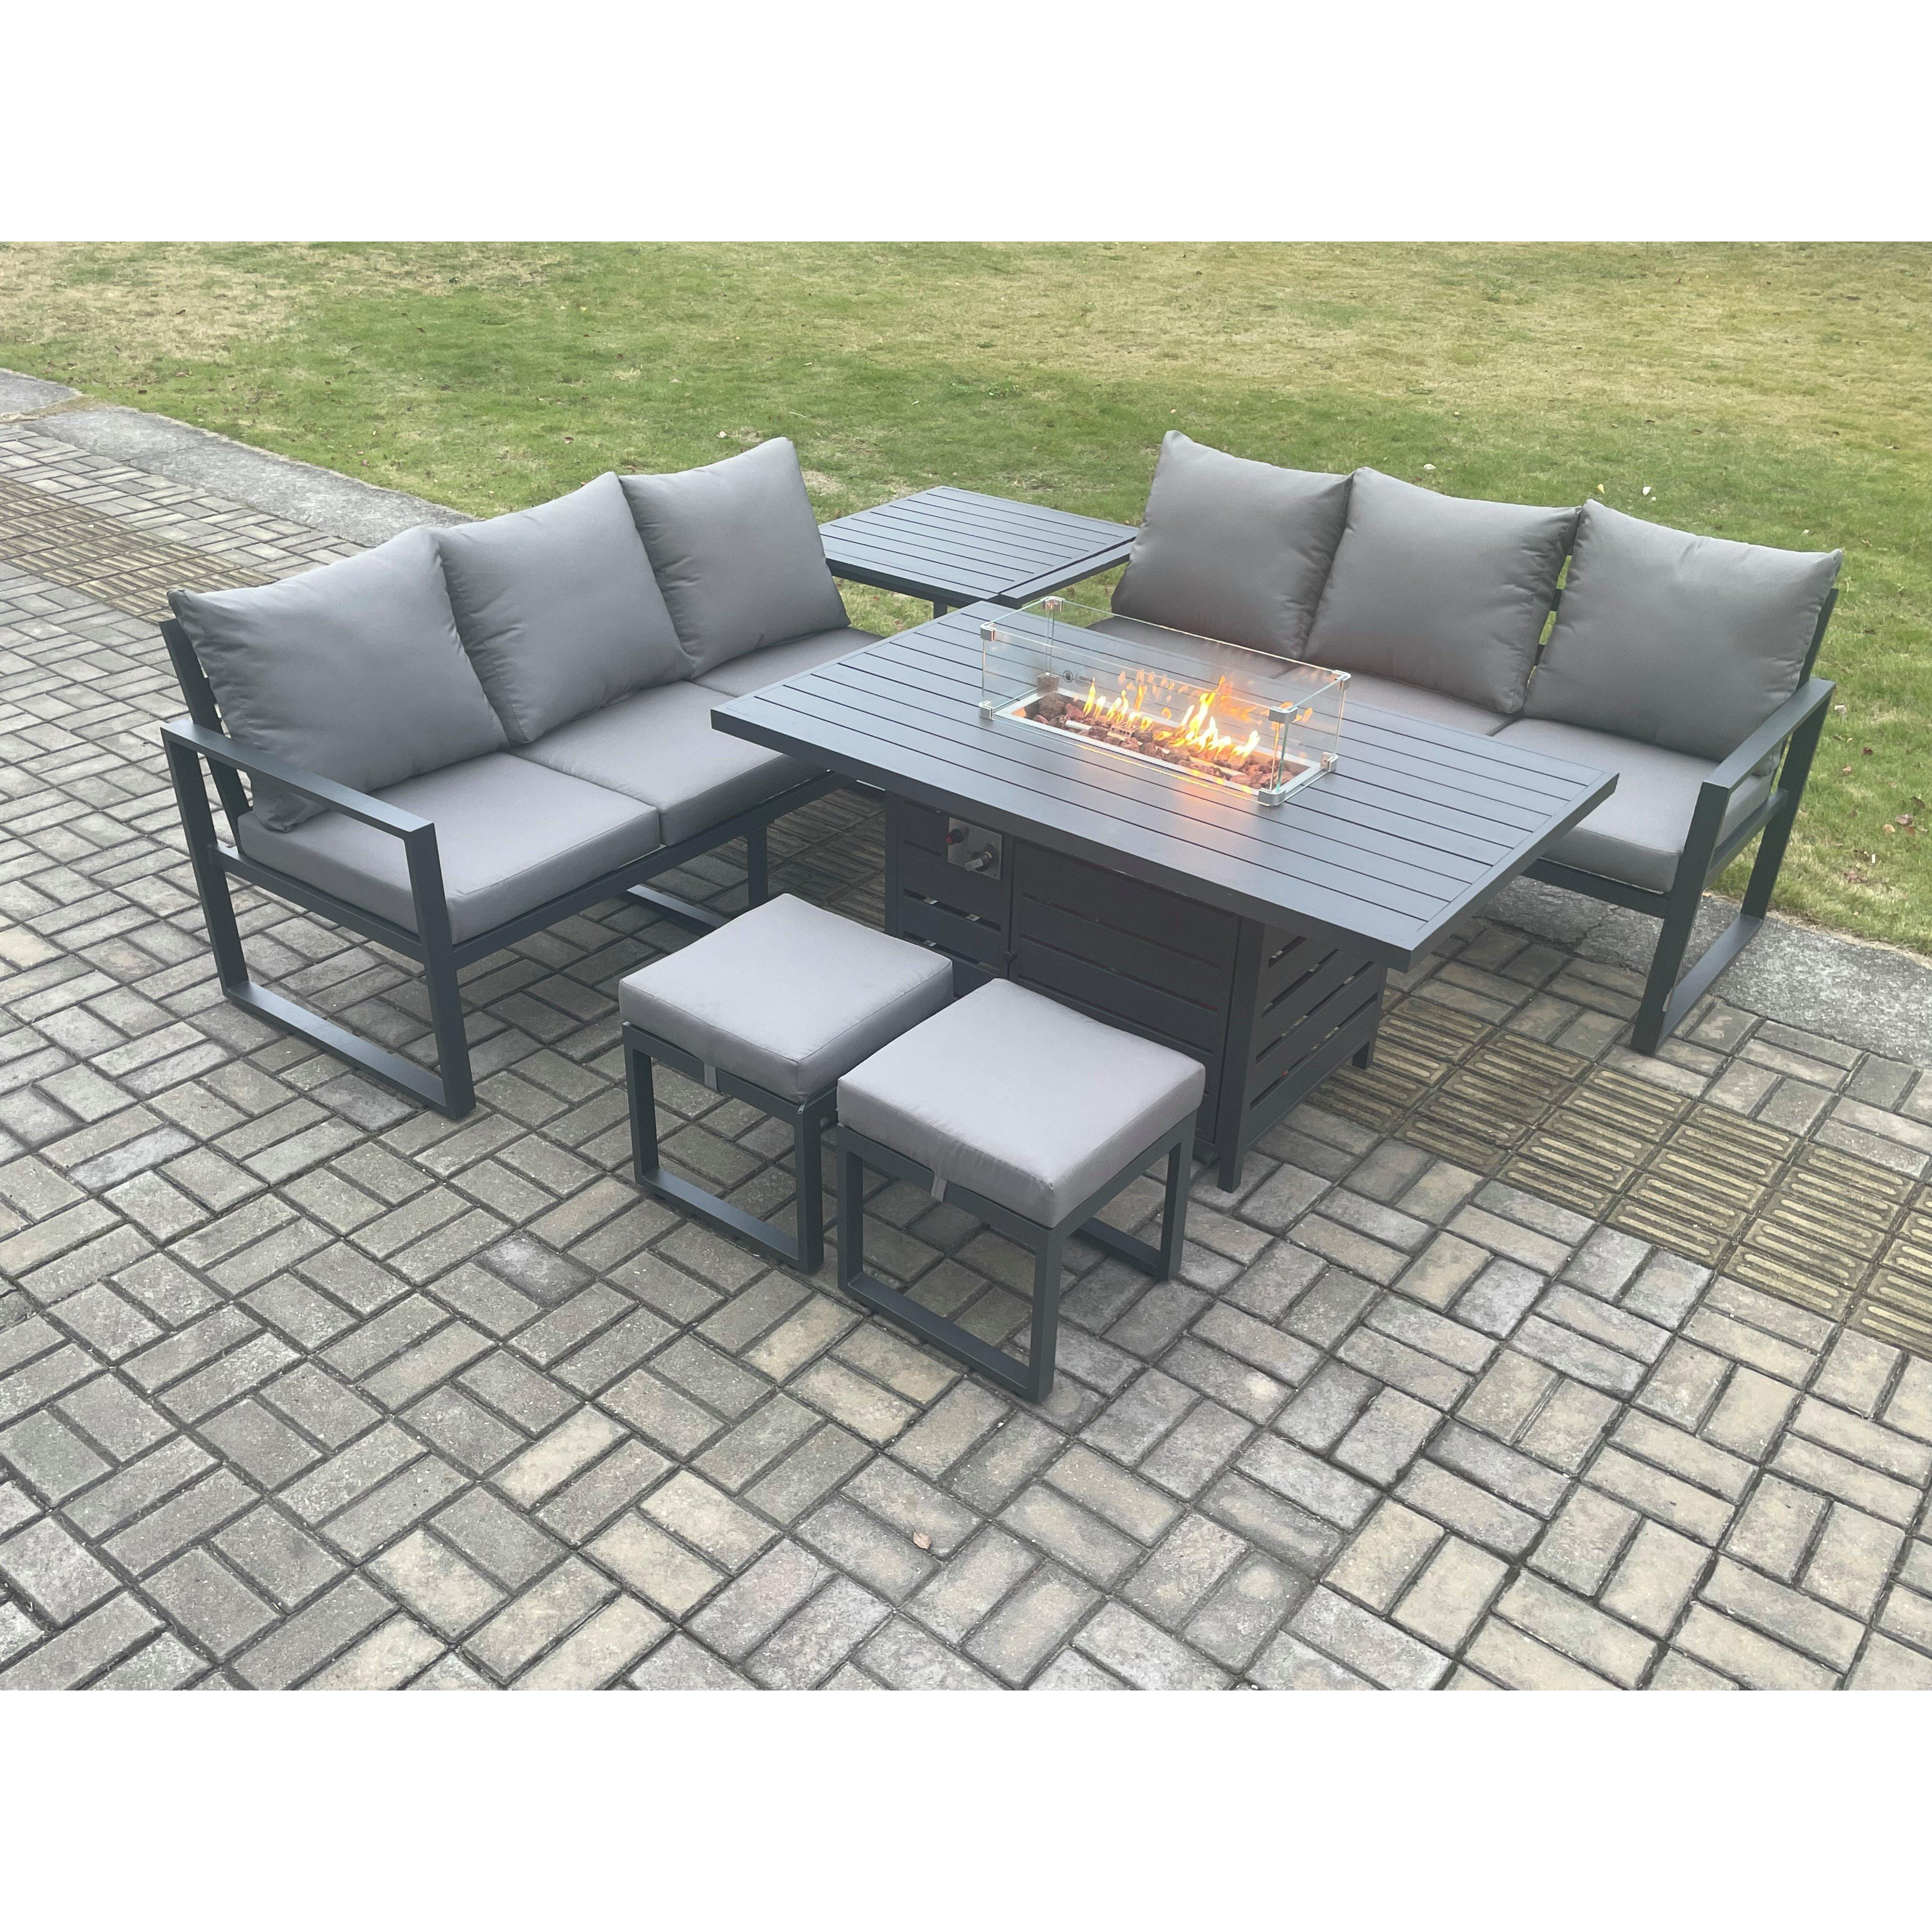 Aluminium 8 Seater Outdoor Garden Furniture Lounge Sofa Set Gas Fire Pit Dining Table with 2 Small Footstools - image 1